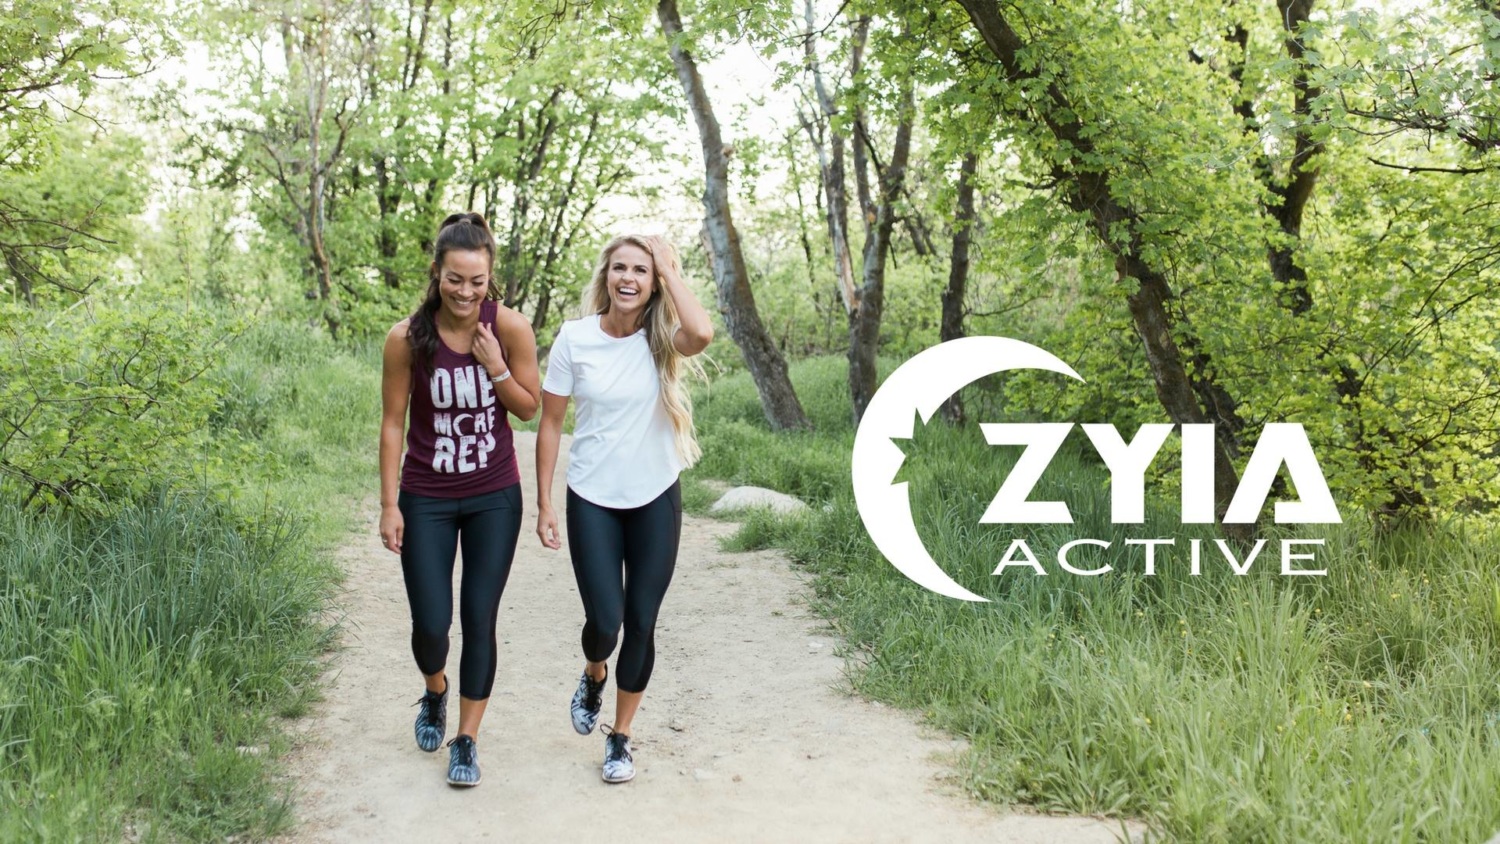 Our first launch after Christmas and - ZYIA Active Ind Rep